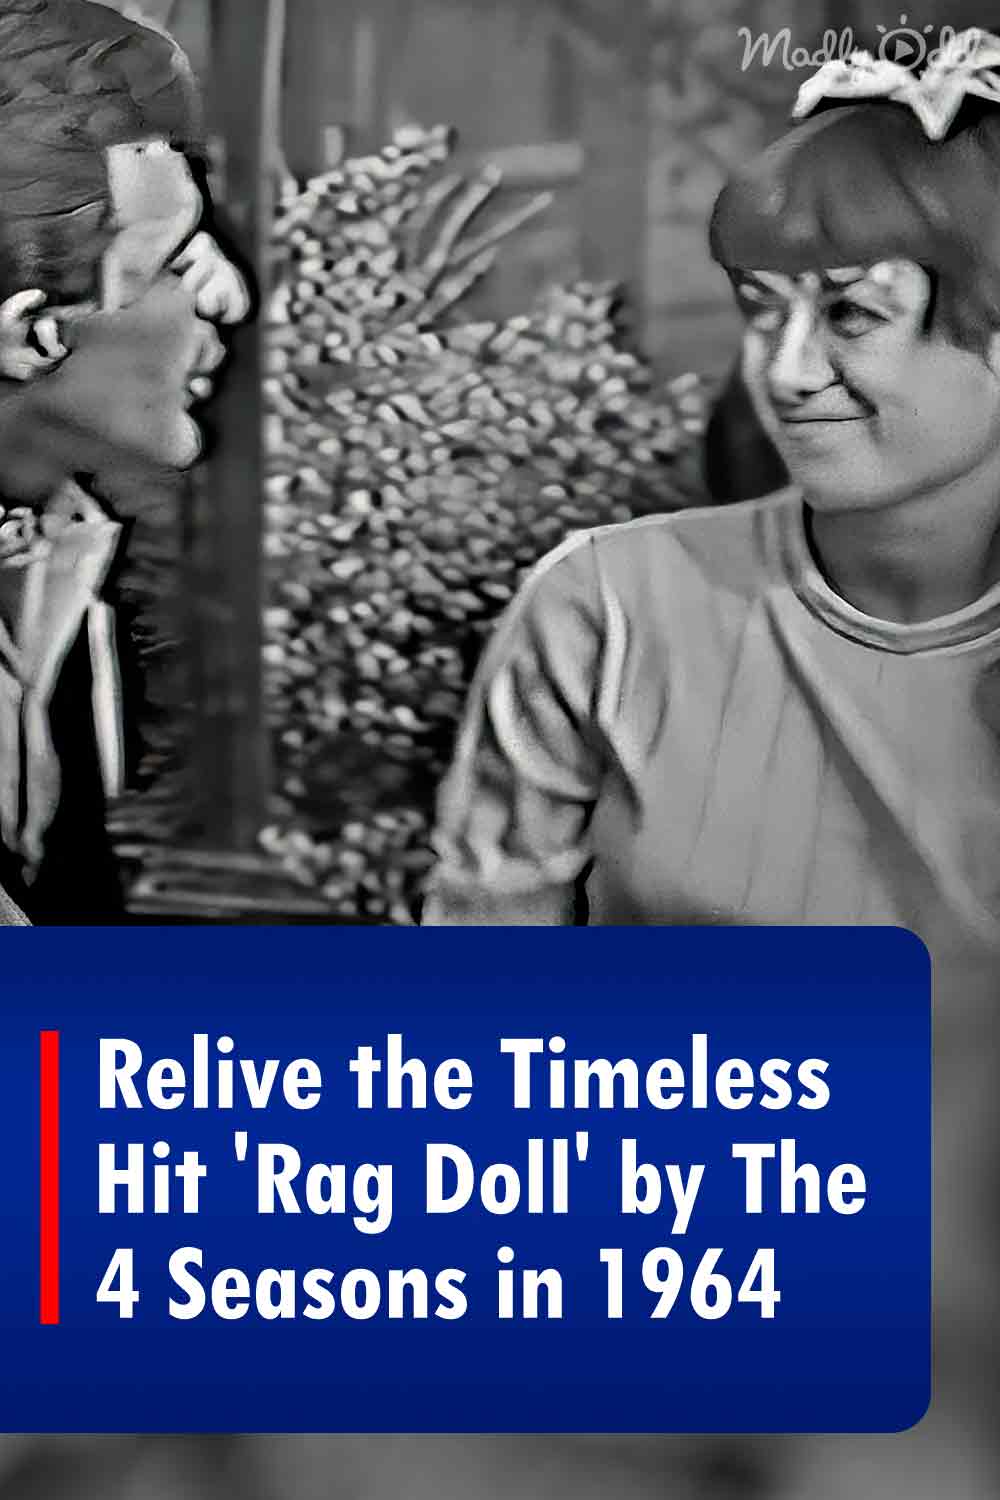 Relive the Timeless Hit \'Rag Doll\' by The 4 Seasons in 1964